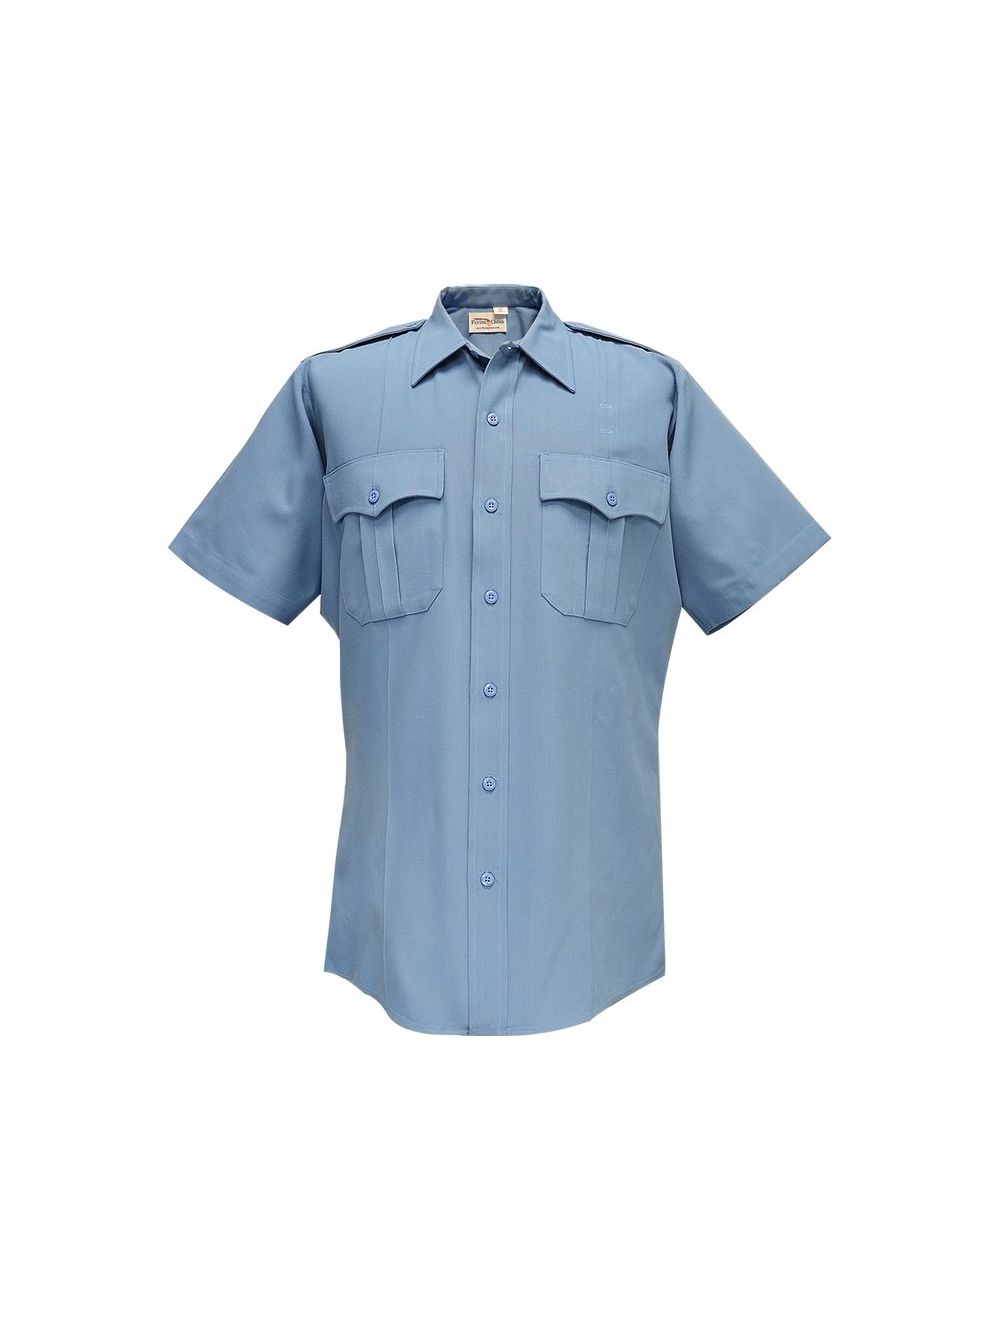 Deluxe Tropical Short Sleeve Shirt w/ Pleated Pockets